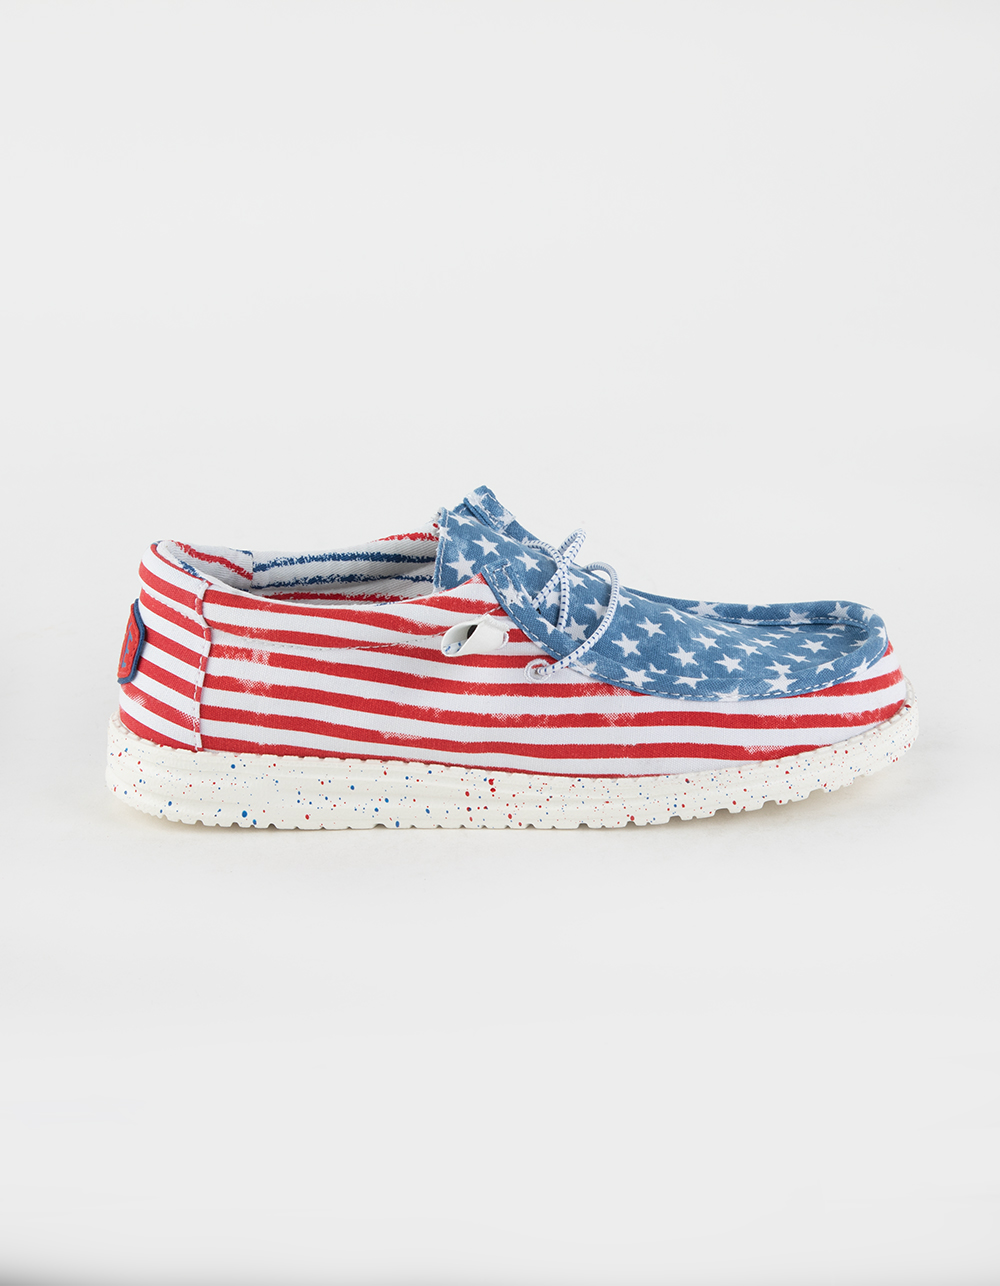 HEY DUDE Wally Patriotic Mens Shoes - RED COMBO